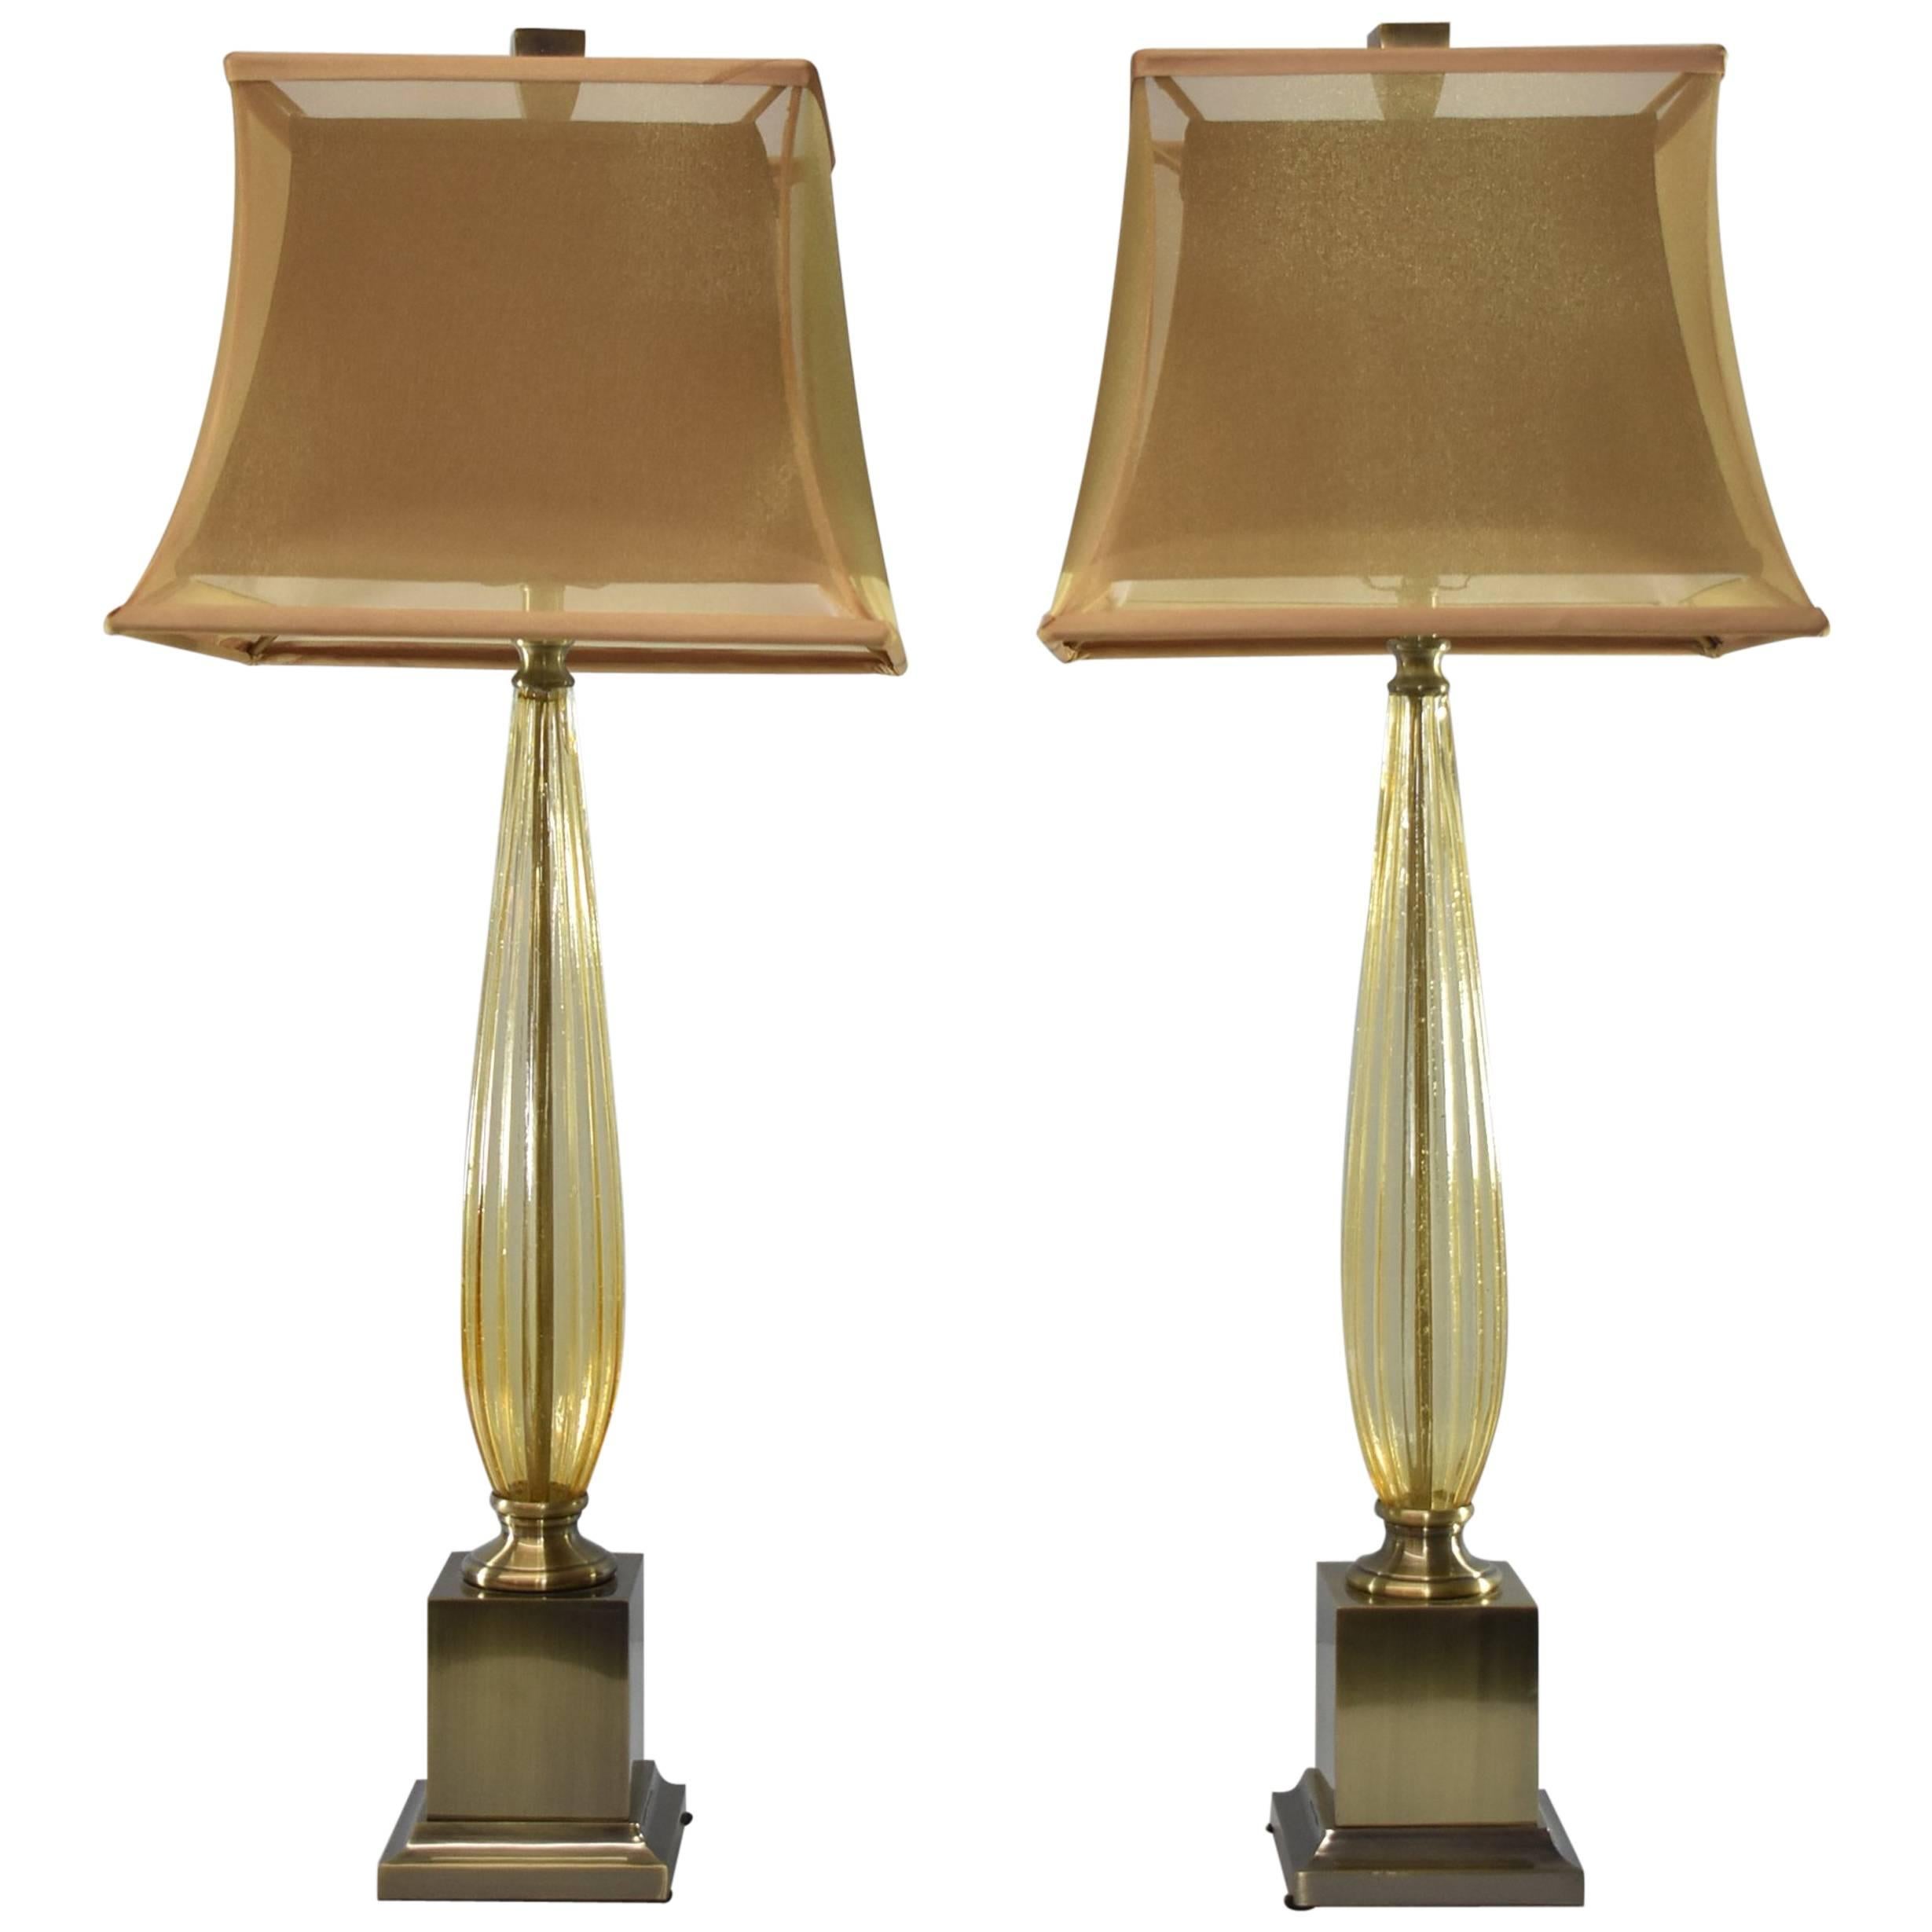 Pair of Antiqued Brass and Amber Glass Table Lamps by John Richard